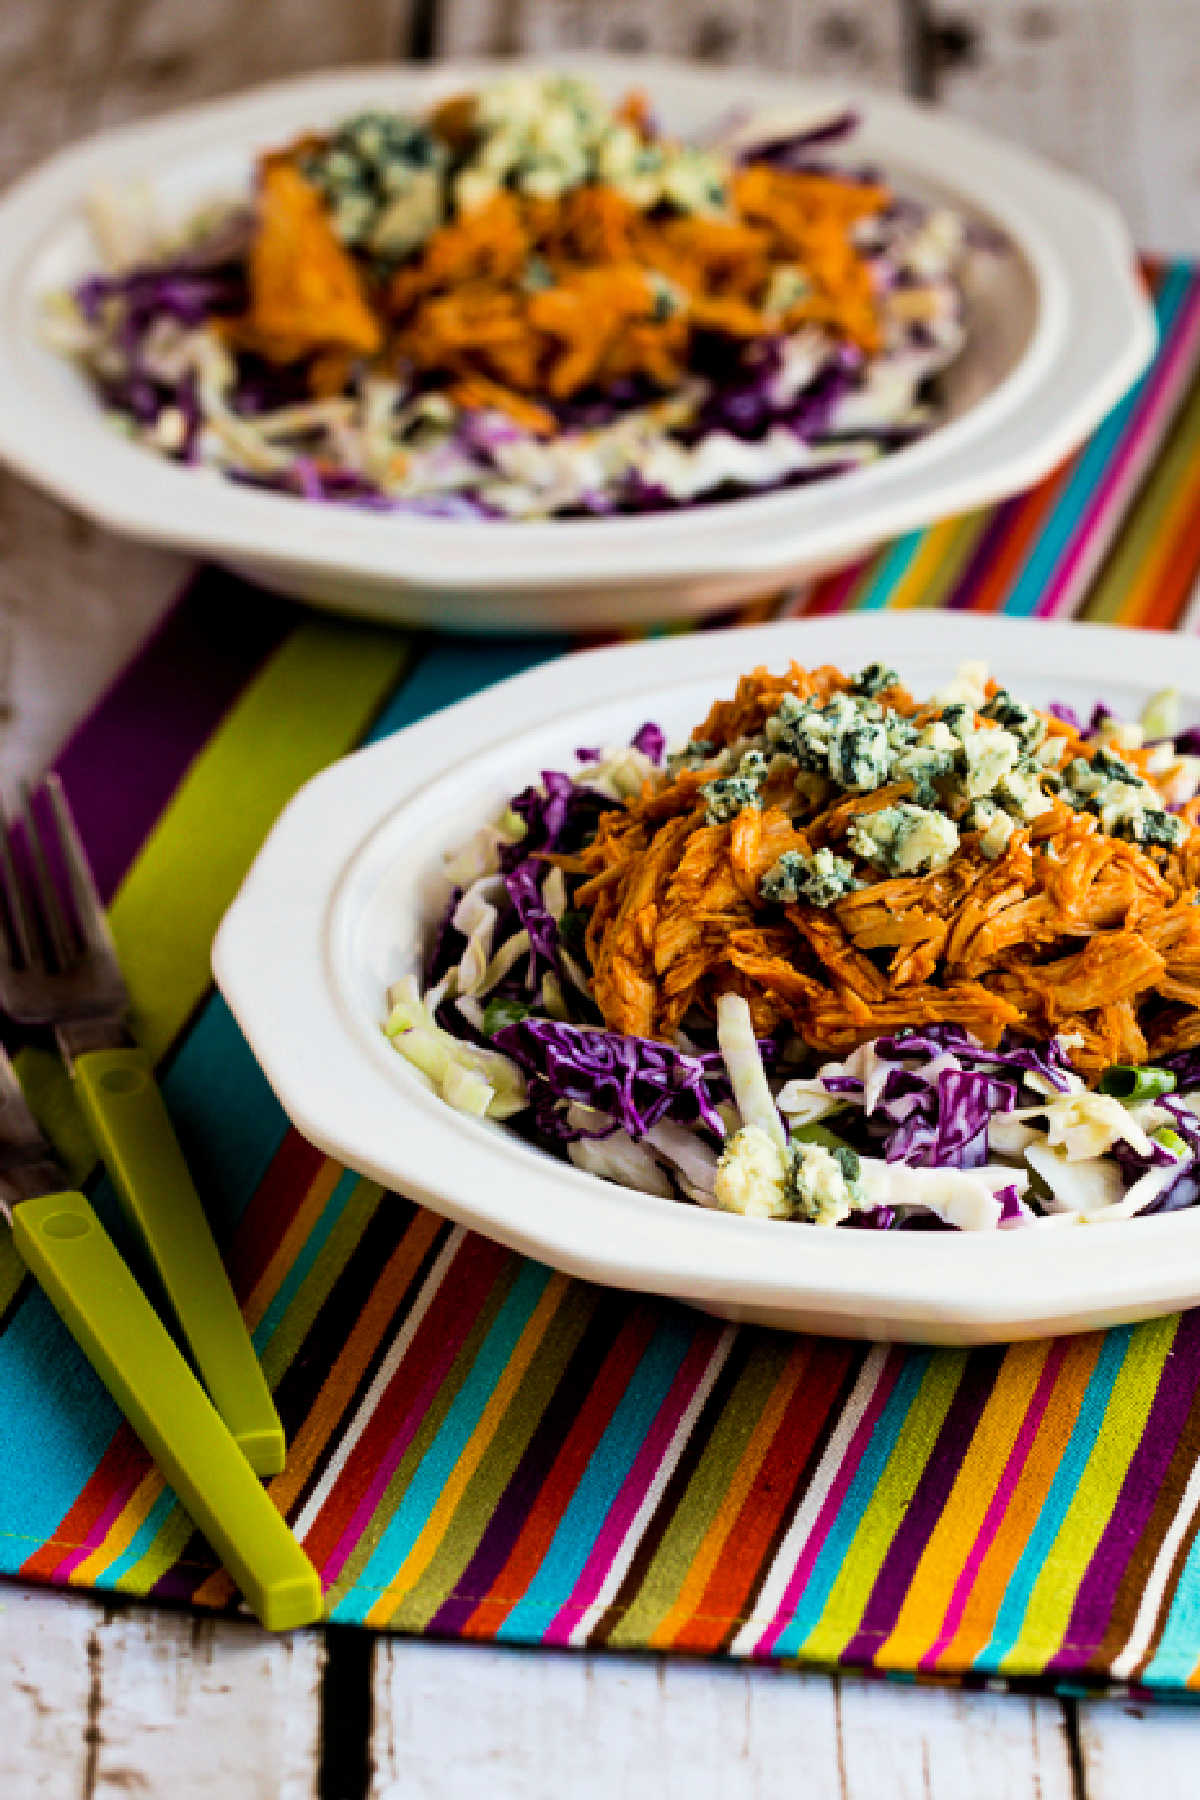 Buffalo Chicken Bowls shown in two serving bowls on vibrant striped napkin napkin